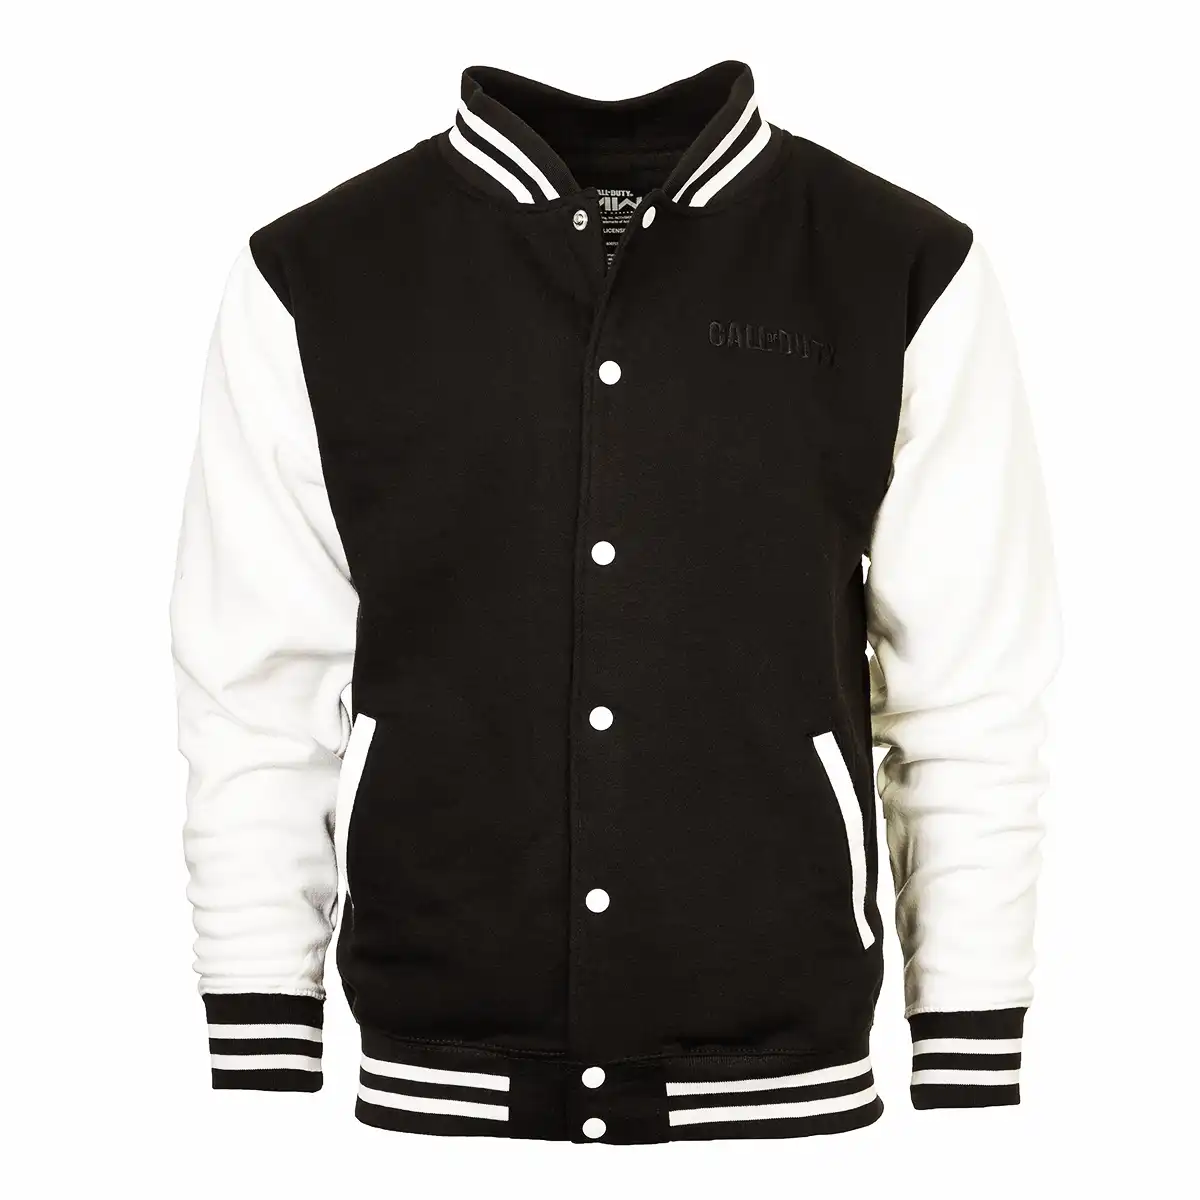 Call of Duty College Jacket "Ghost" Black/White L